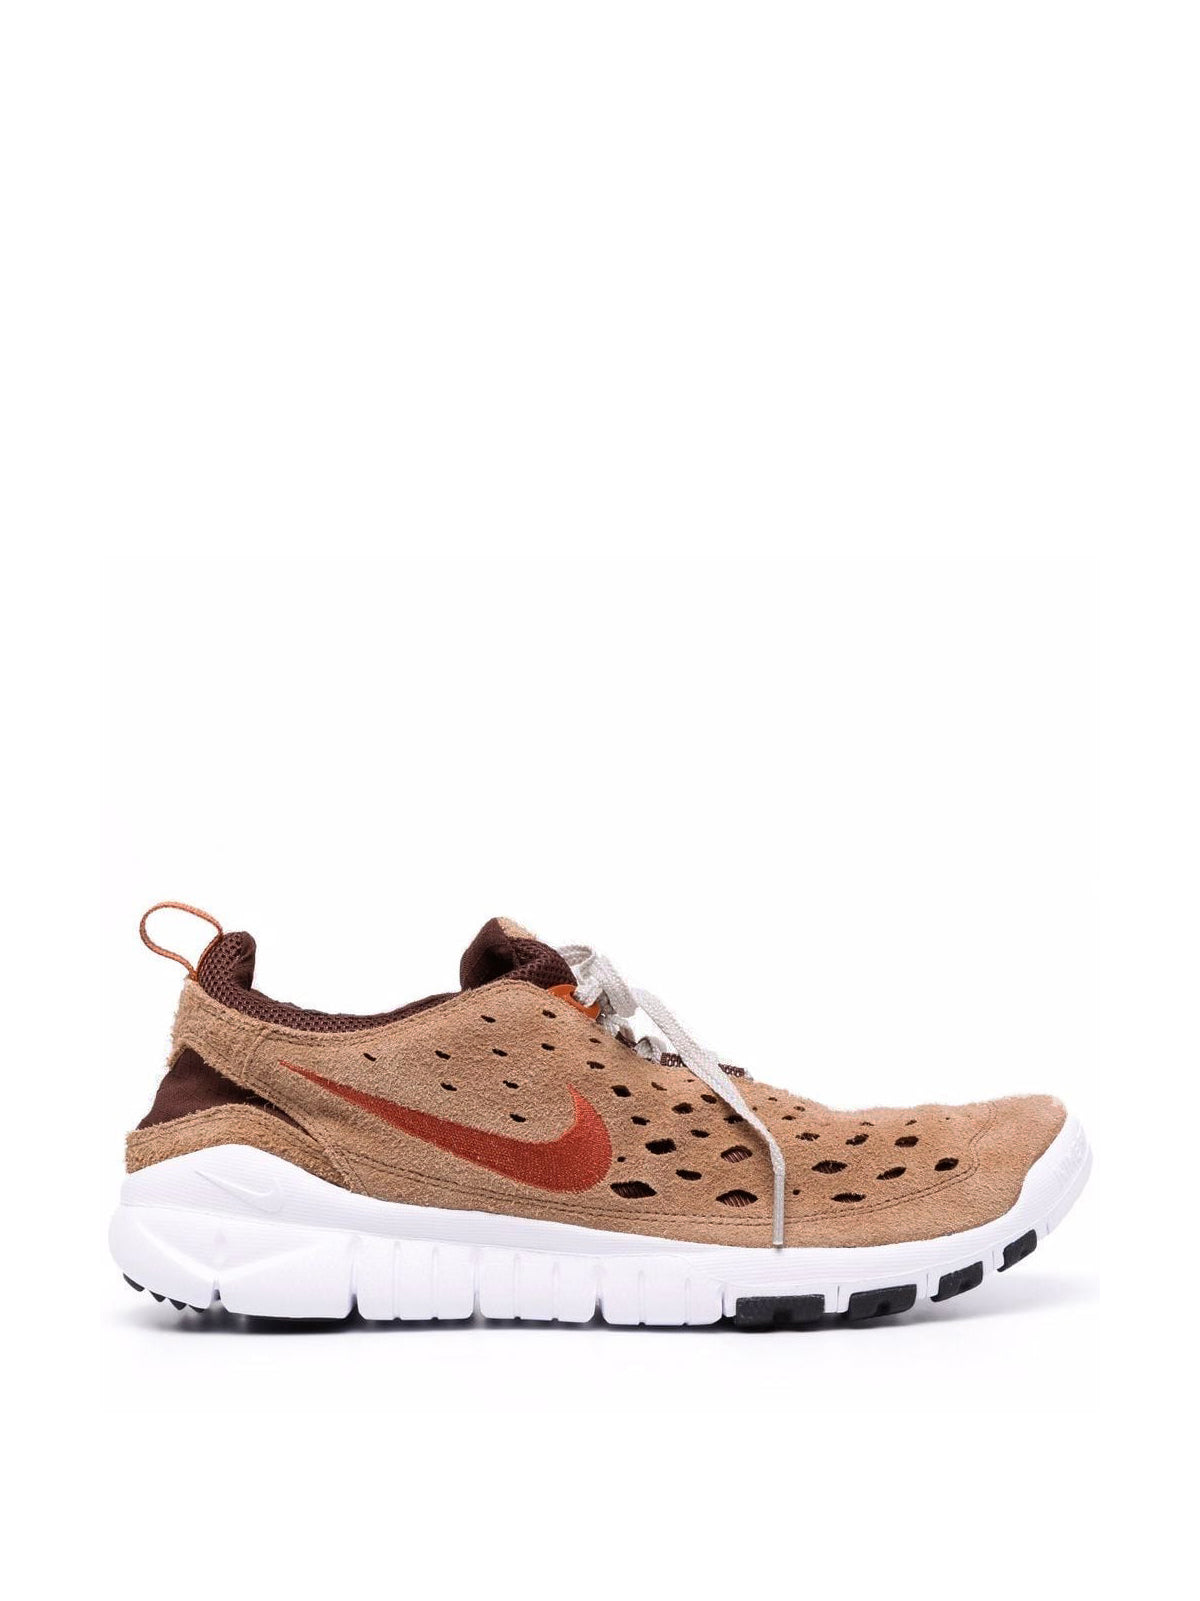 Nike-OUTLET-SALE-Free Run Trail Dk Driftwood Sneakers-ARCHIVIST